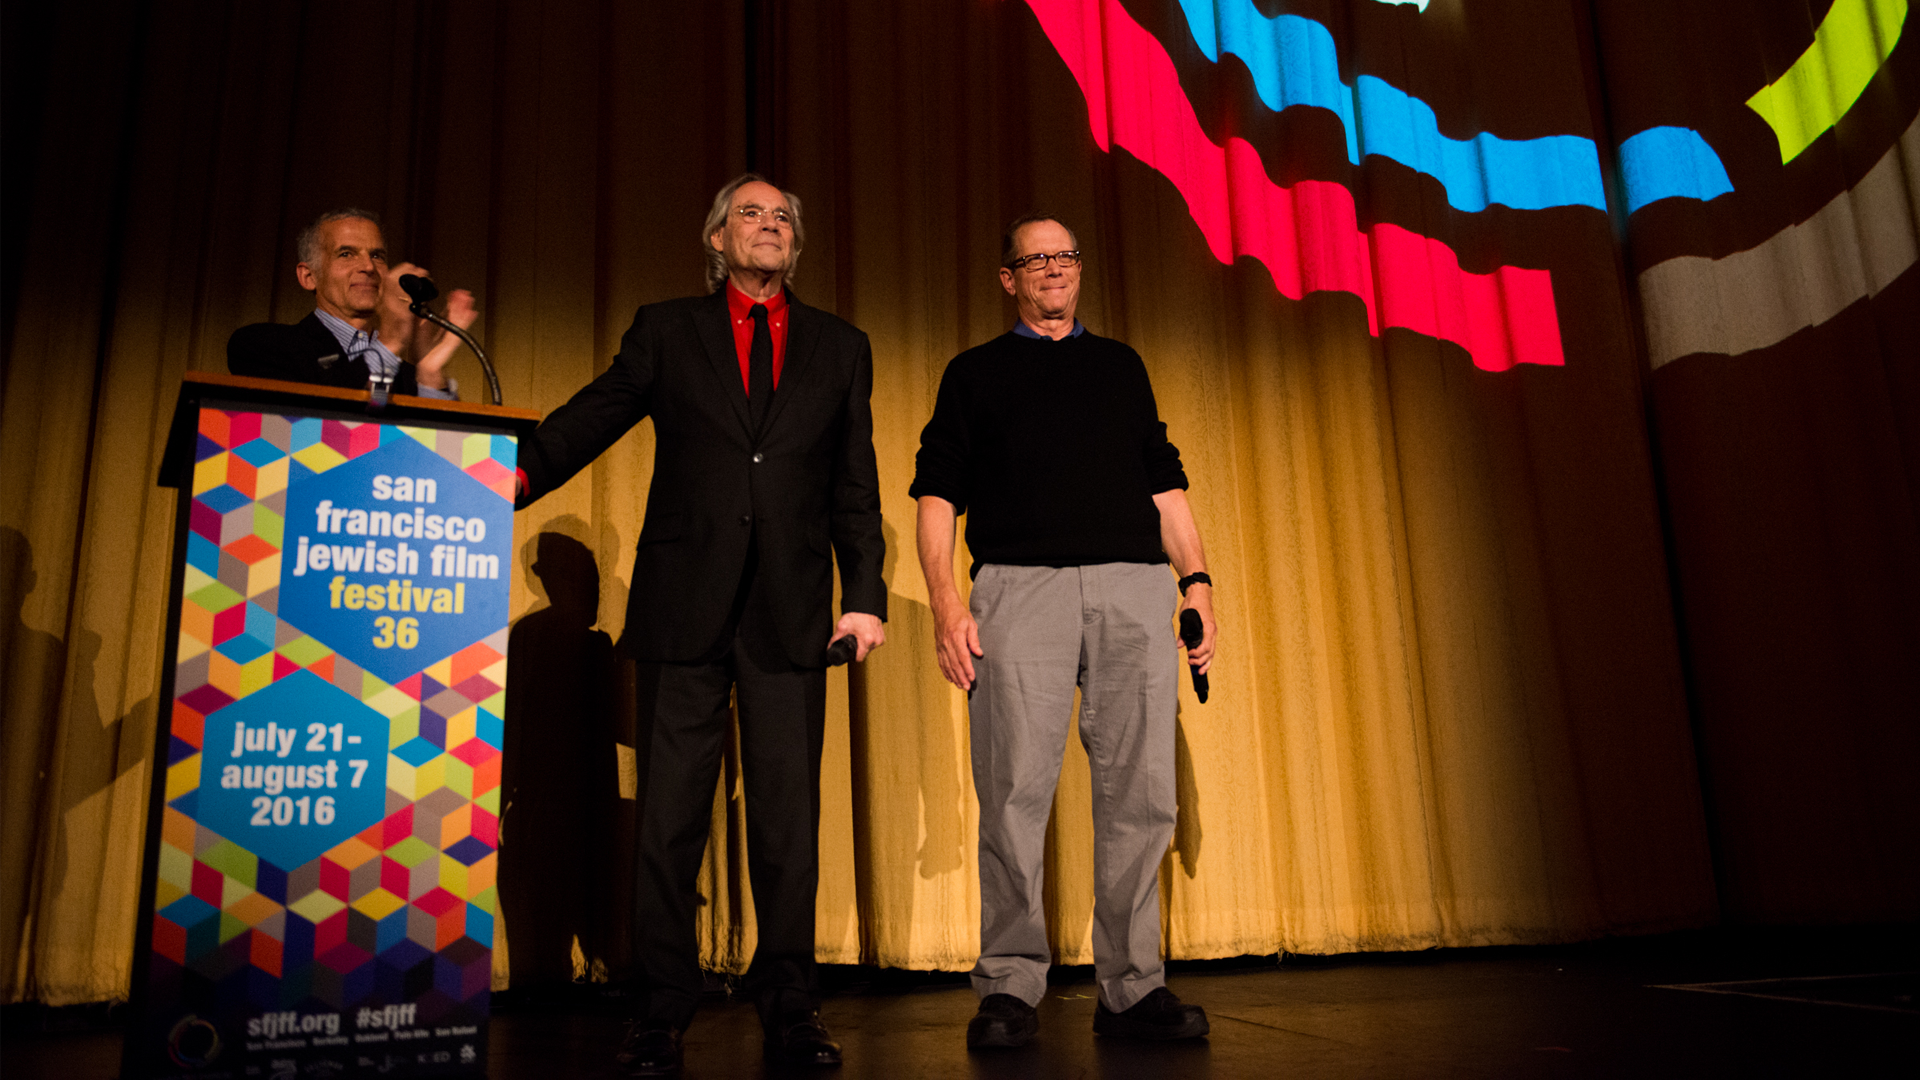 SF Jewish Film Festival | JFI's signature program is the first and still the largest Jewish film festival in the world with an audience of over 40,000 across 5 Bay Area cities each summer.